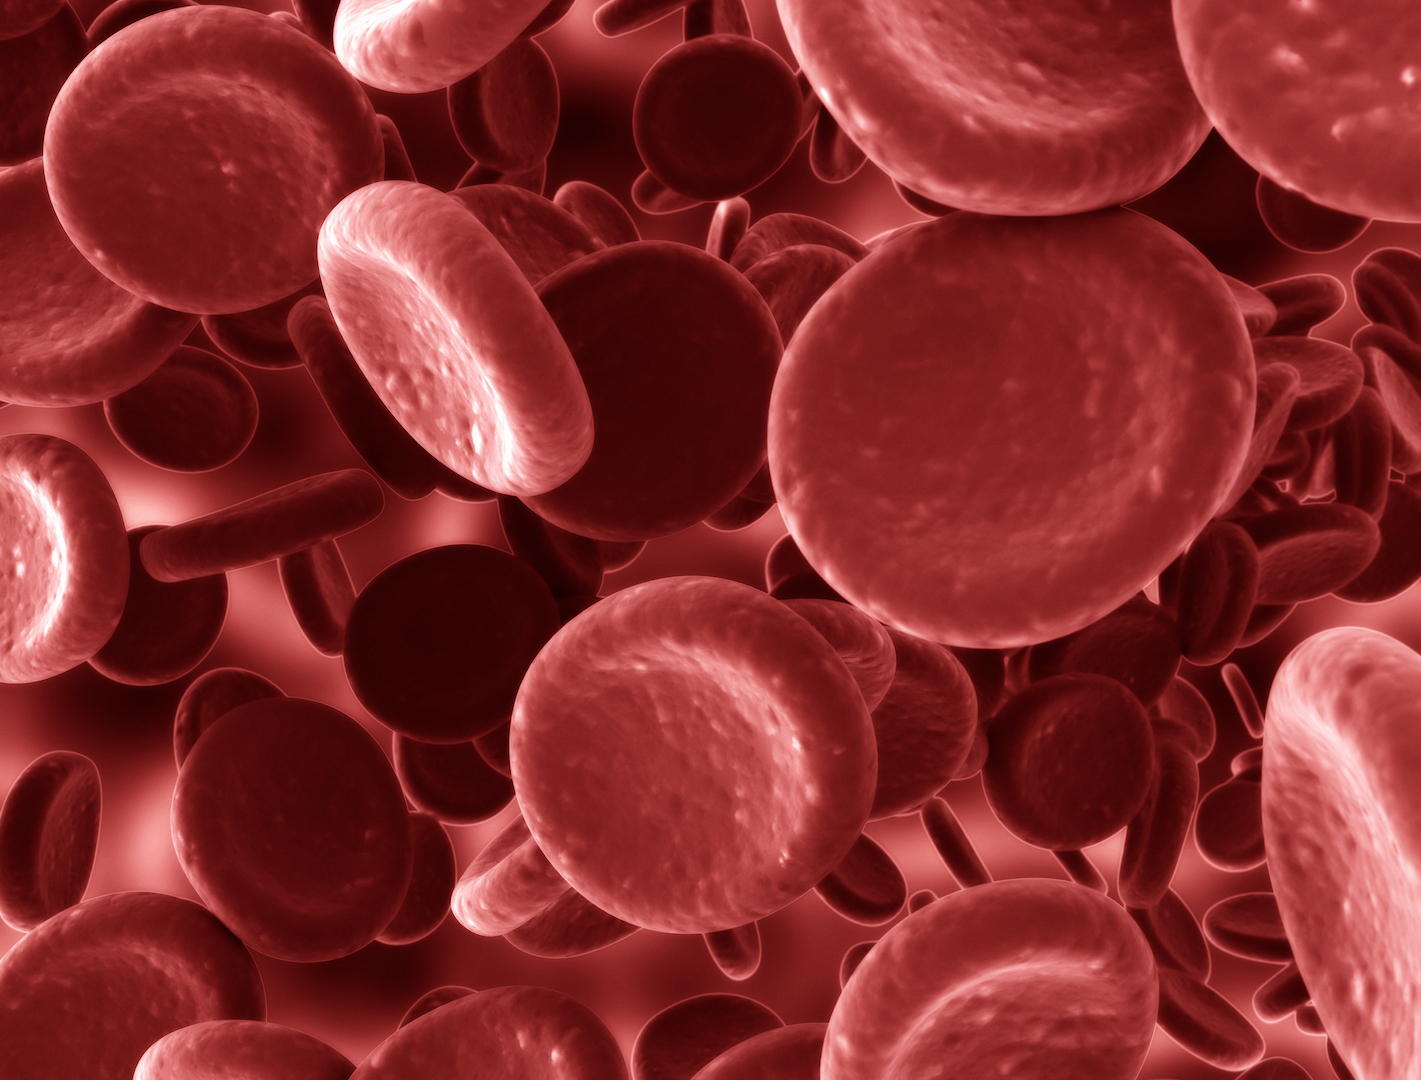 Anemia: Top 5 Causes. Symptoms and treatment; The most common